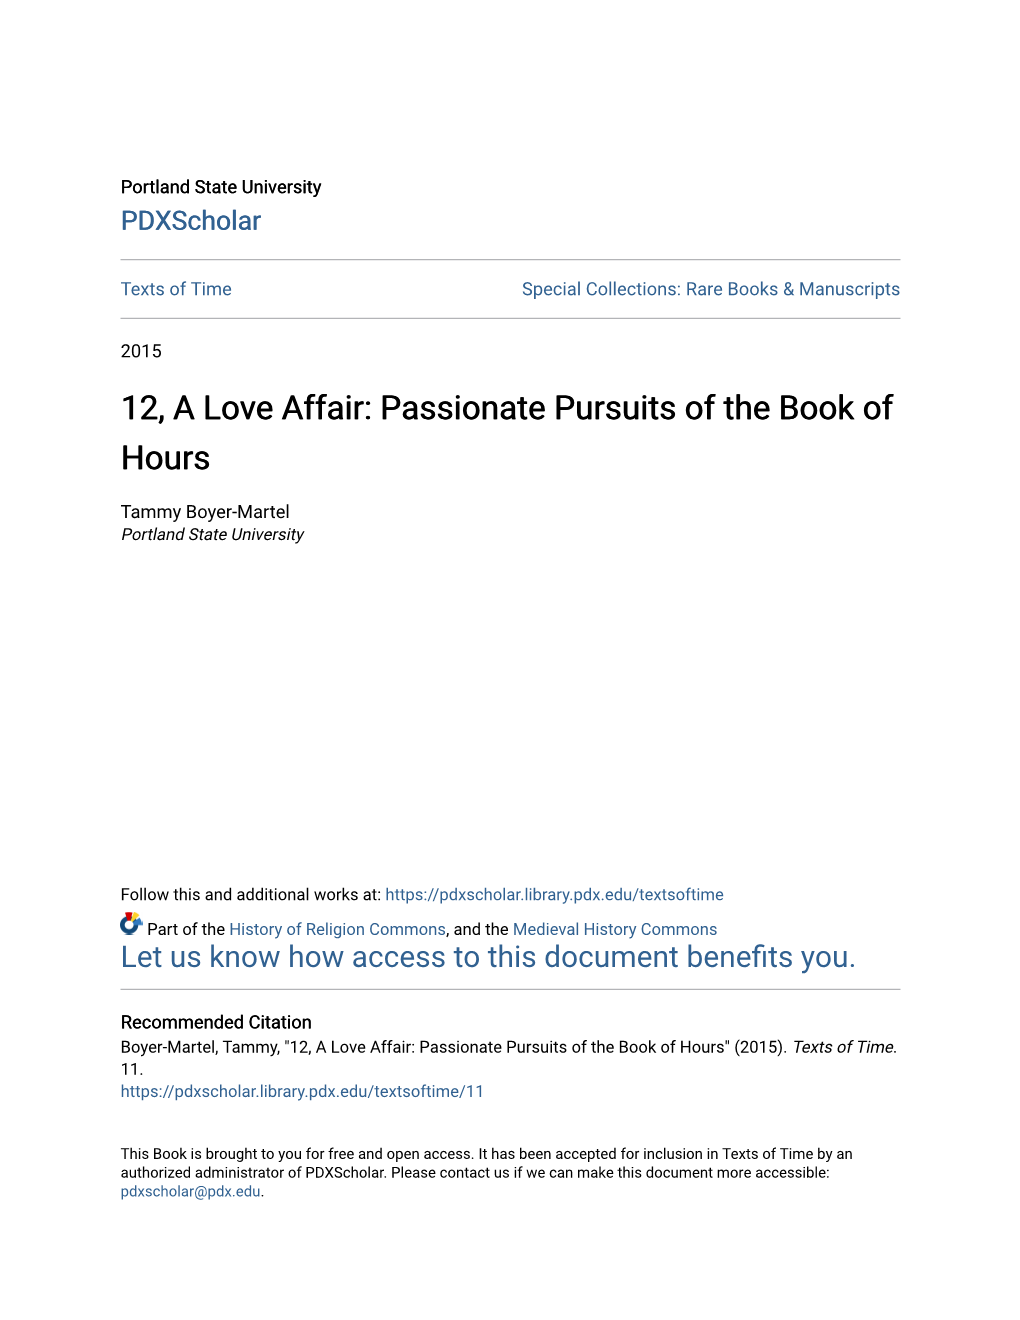 12, a Love Affair: Passionate Pursuits of the Book of Hours